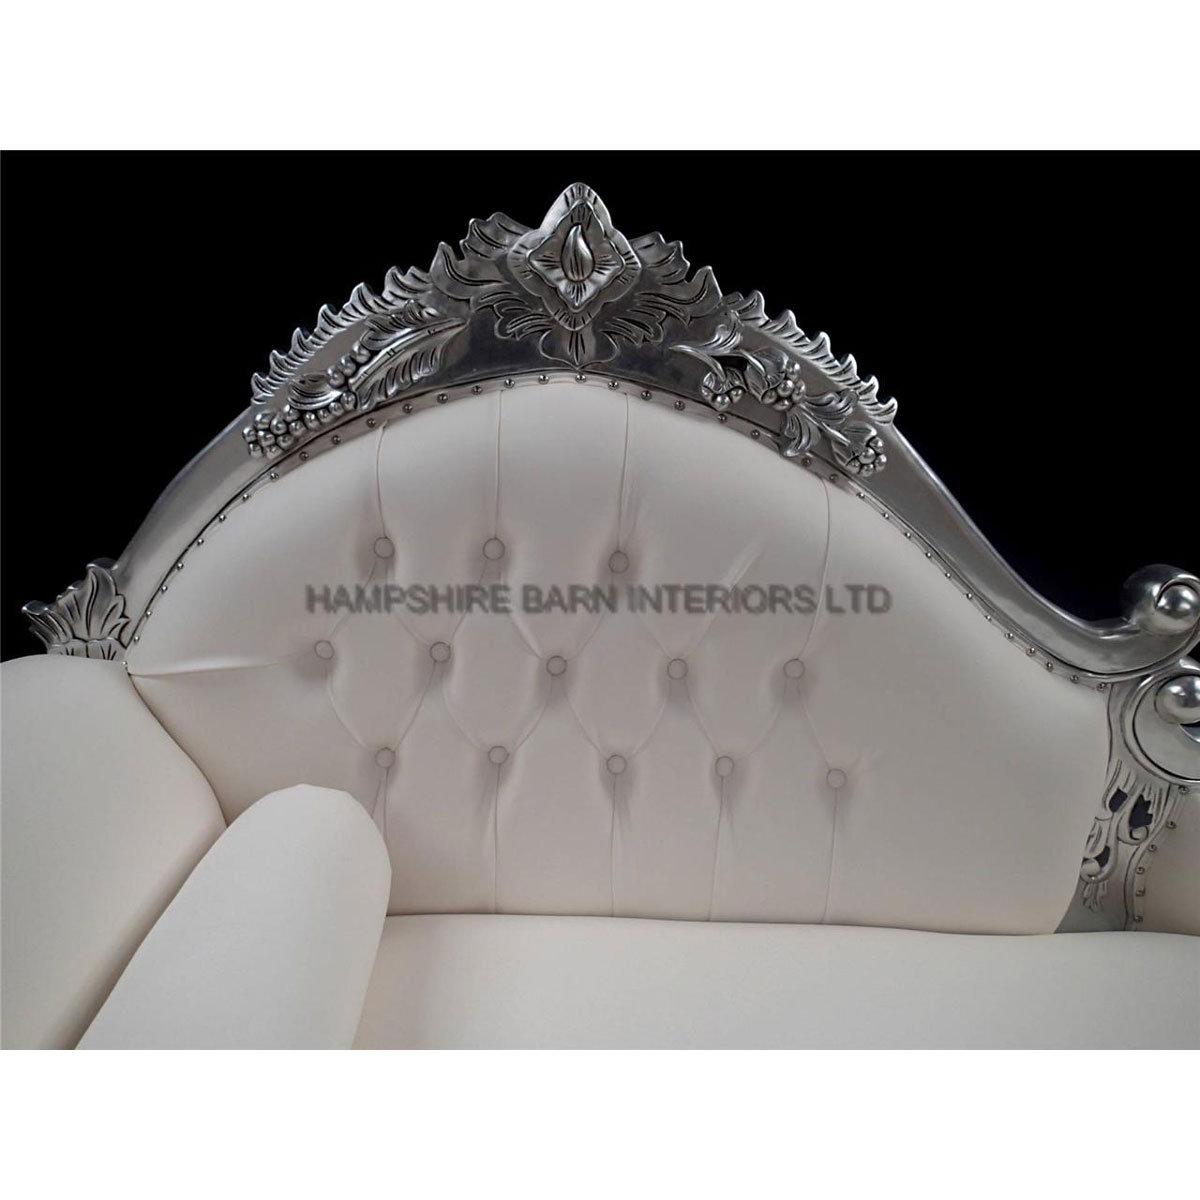 Amberley Chaise Longue Medium Size Ornate Silver Leaf With White Faux Leather 2 - Hampshire Barn Interiors - Amberley Chaise Longue Medium Size Ornate Silver Leaf With White Faux Leather -